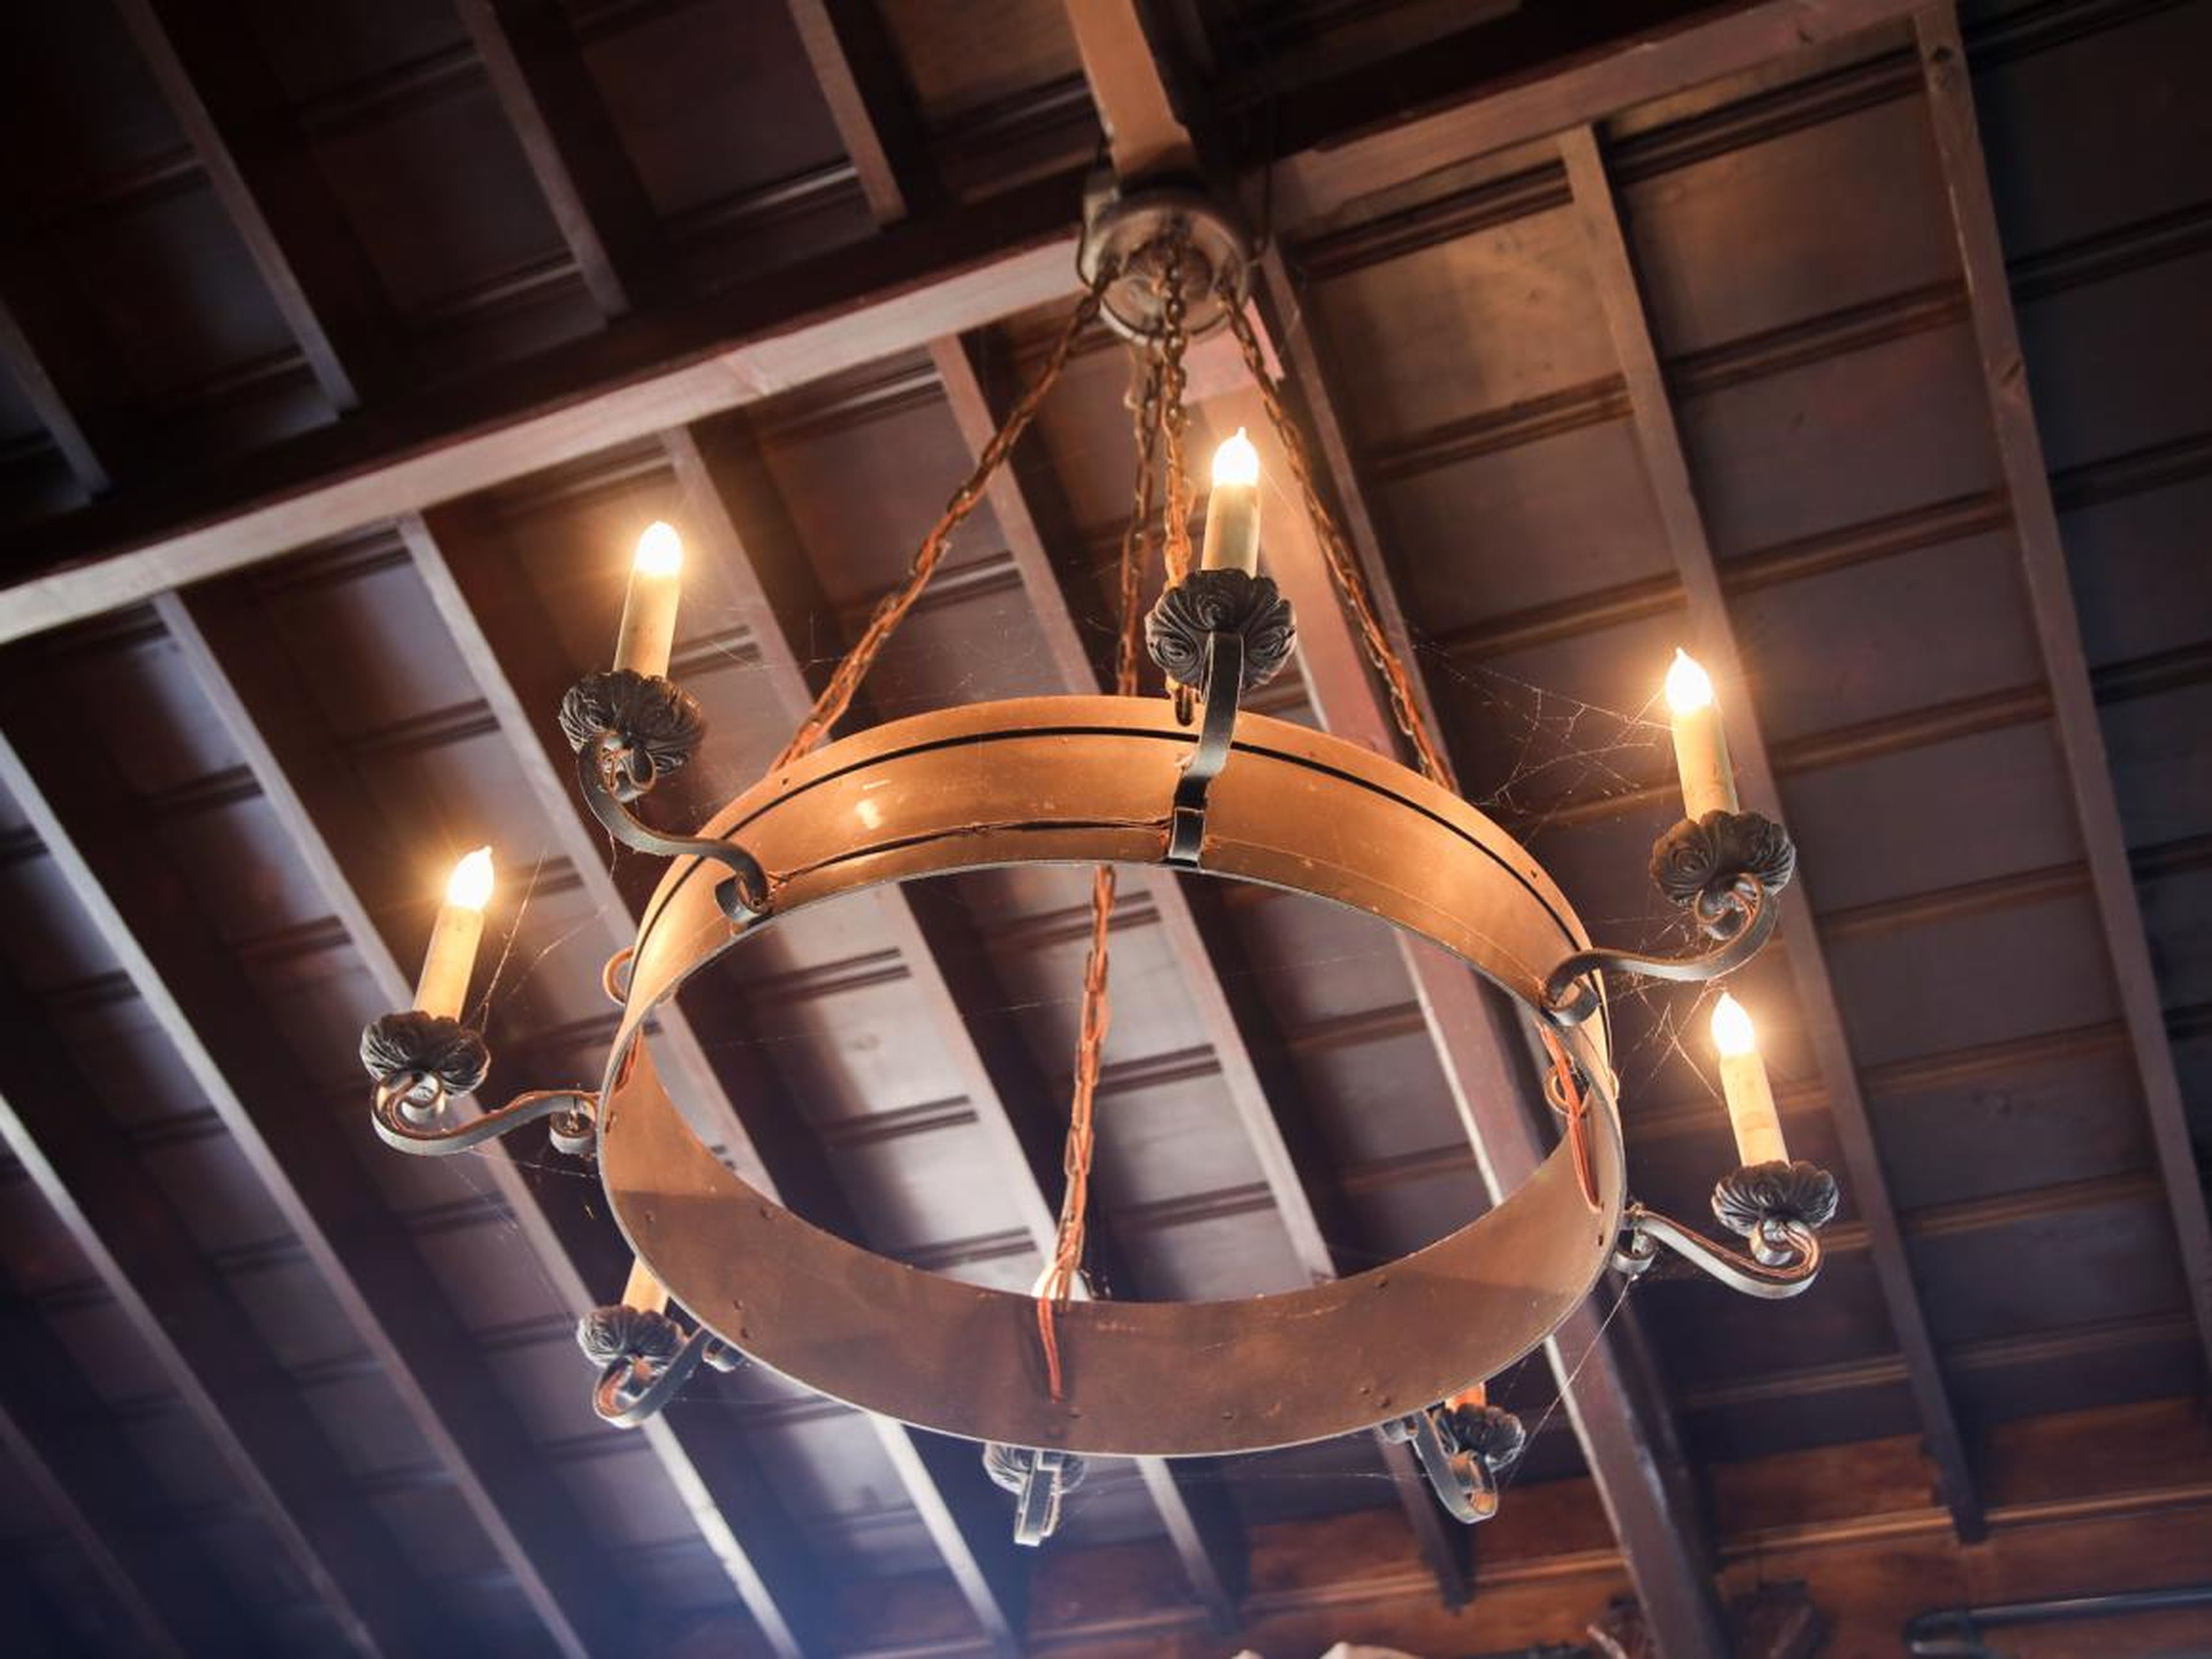 What looks like a medieval chandelier hangs from the ceiling. Gilbert said it came with the property.